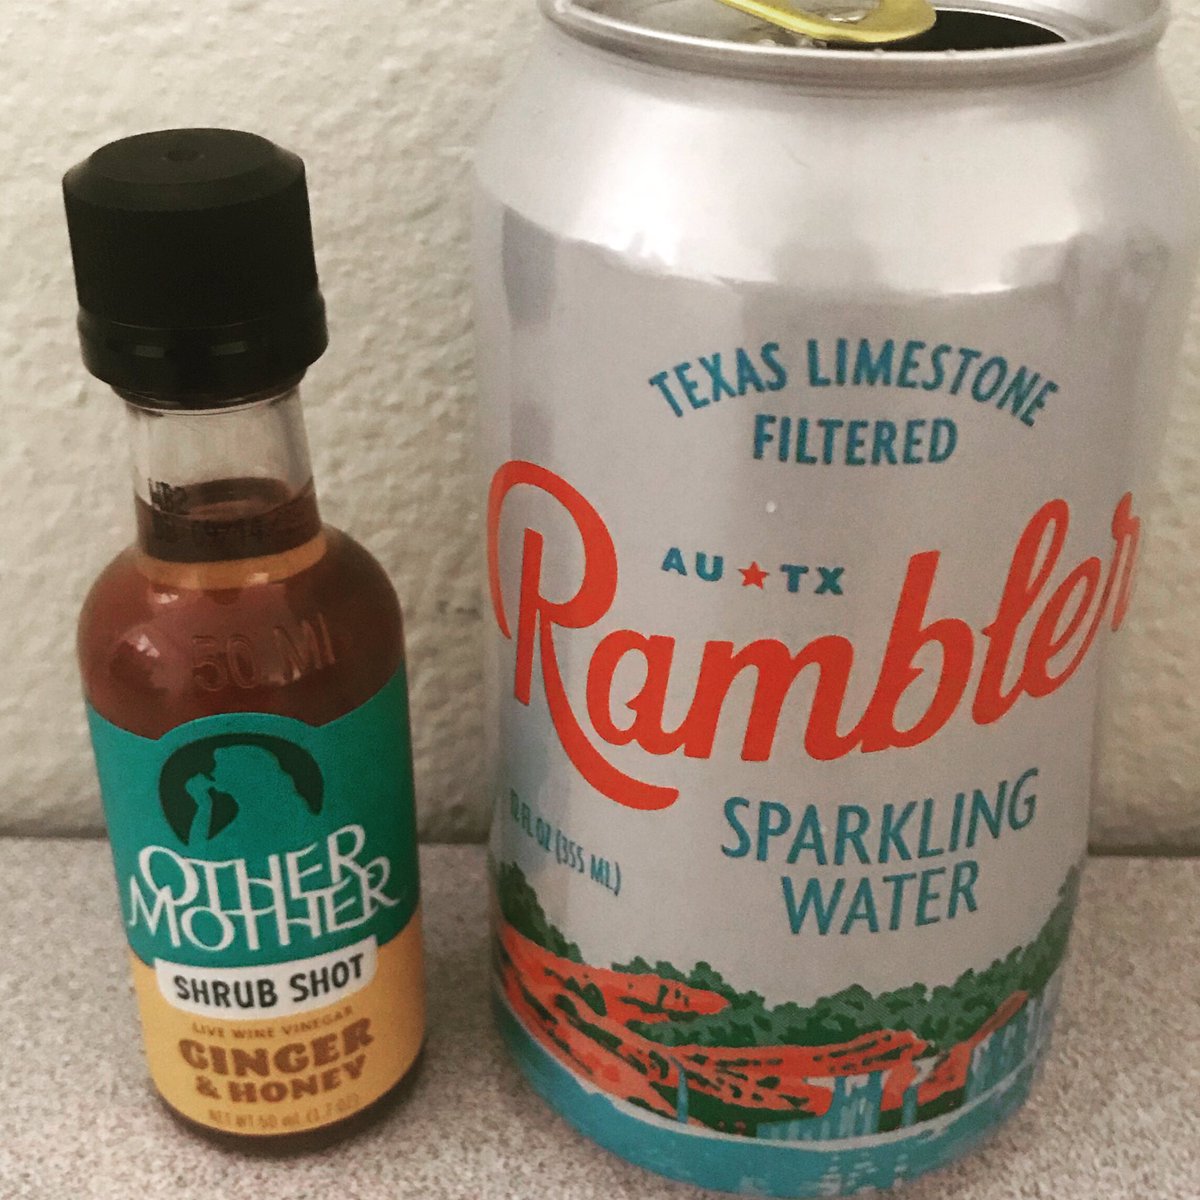 Starting my day out well with an Other Mother Shrub Shot. #othermothershrubshot #ramblersparklingwater